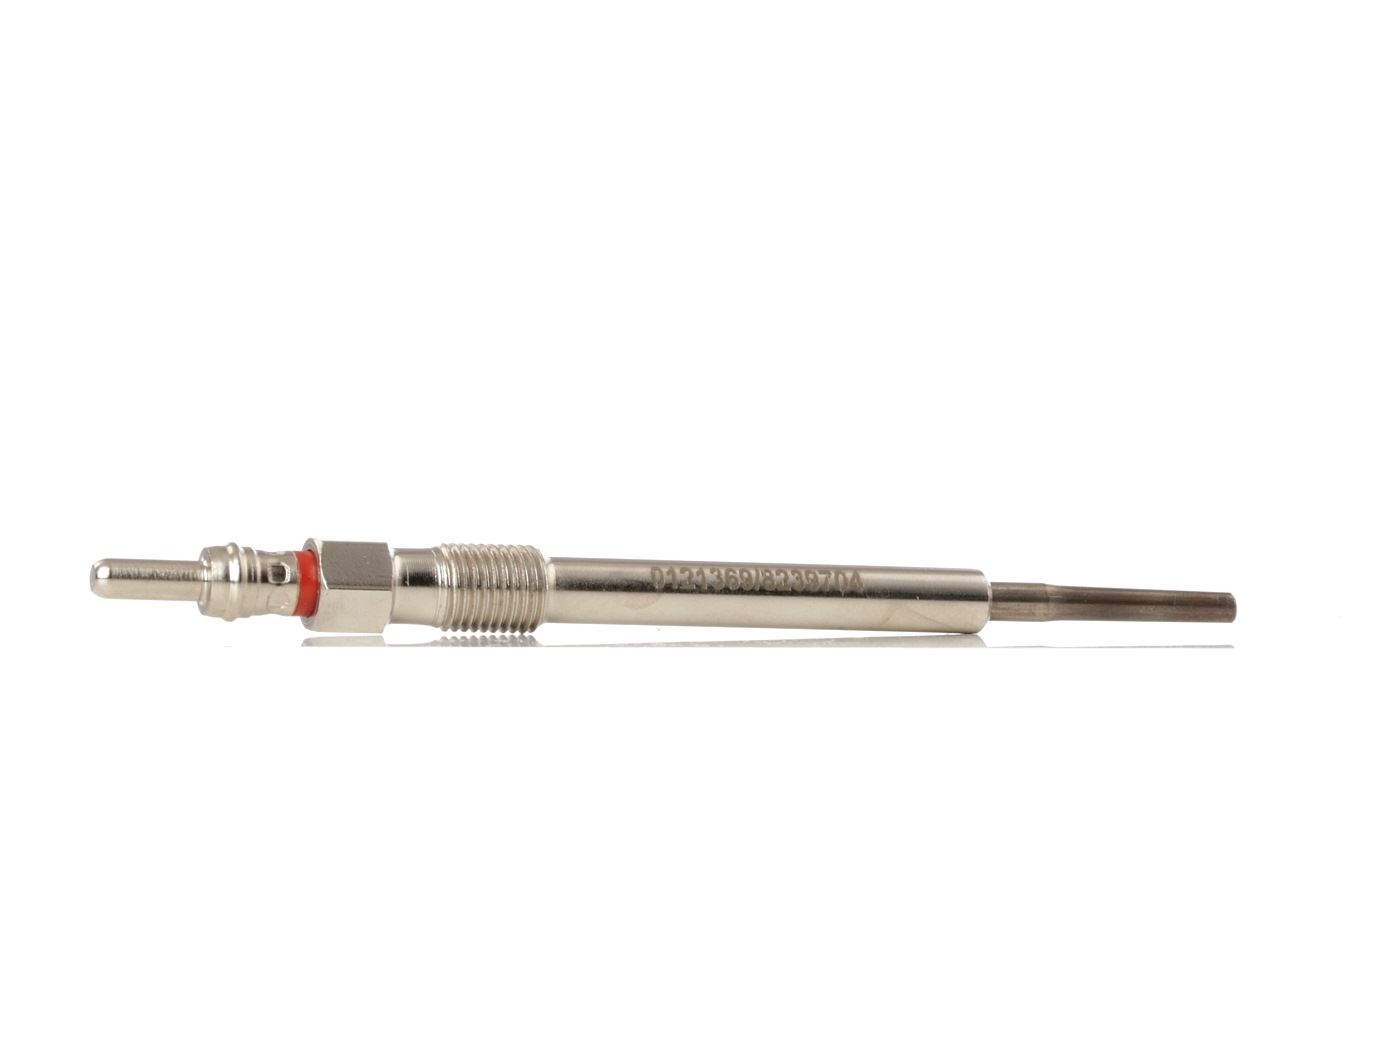 STARK 4,4V M9 x 1, after-glow capable, Pencil-type Glow Plug, 119,5 mm, 93° Total Length: 119,5mm, Thread Size: M9 x 1 Glow plugs SKGP-1890159 buy